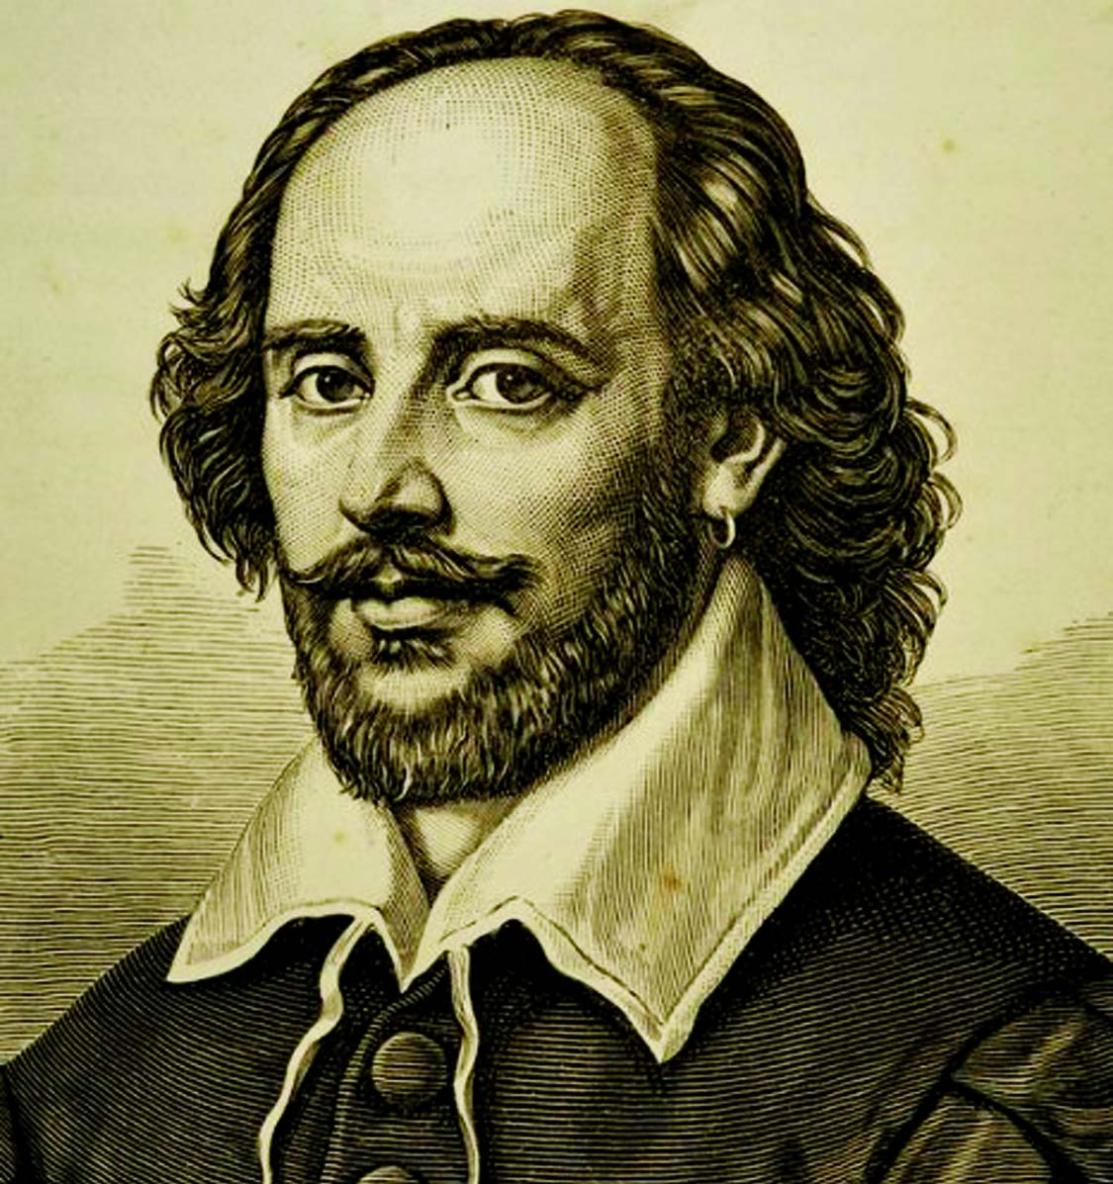 What are Some of the Challenges in Interpreting and Staging Shakespeare's Plays Today?